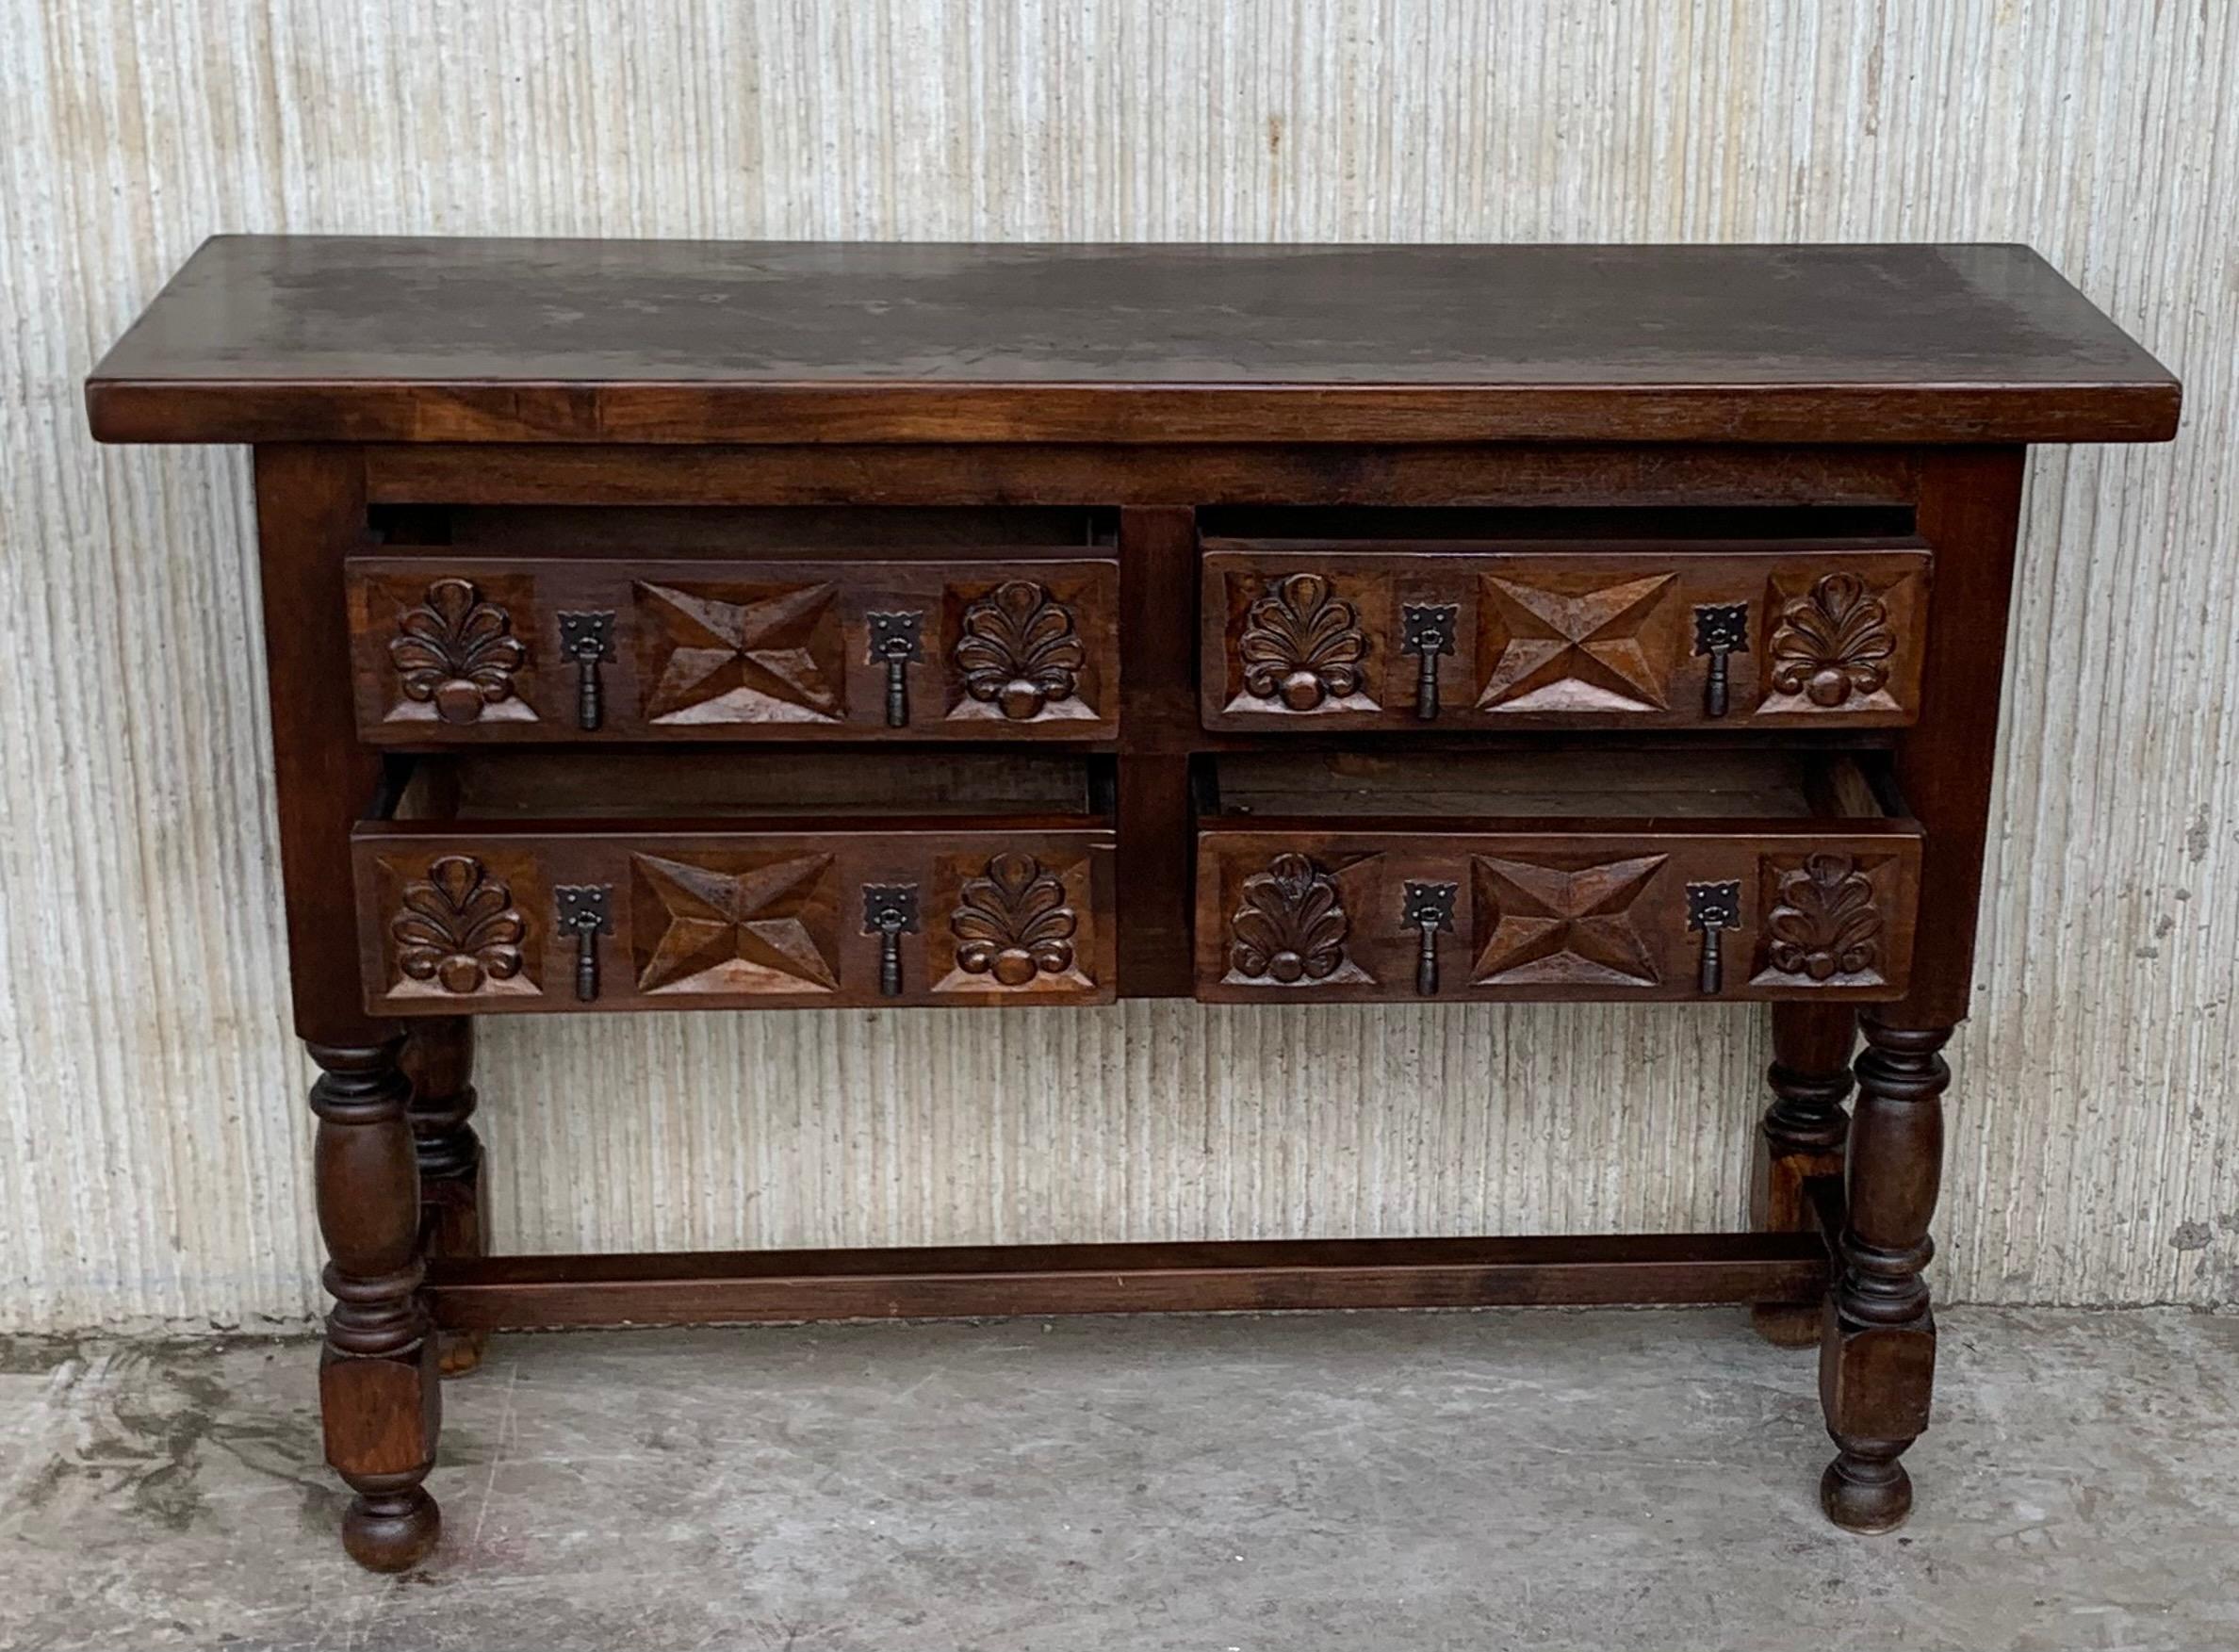 Baroque Revival 19th Century Catalan Spanish Carved Walnut Console Sofa Table, Four Drawers